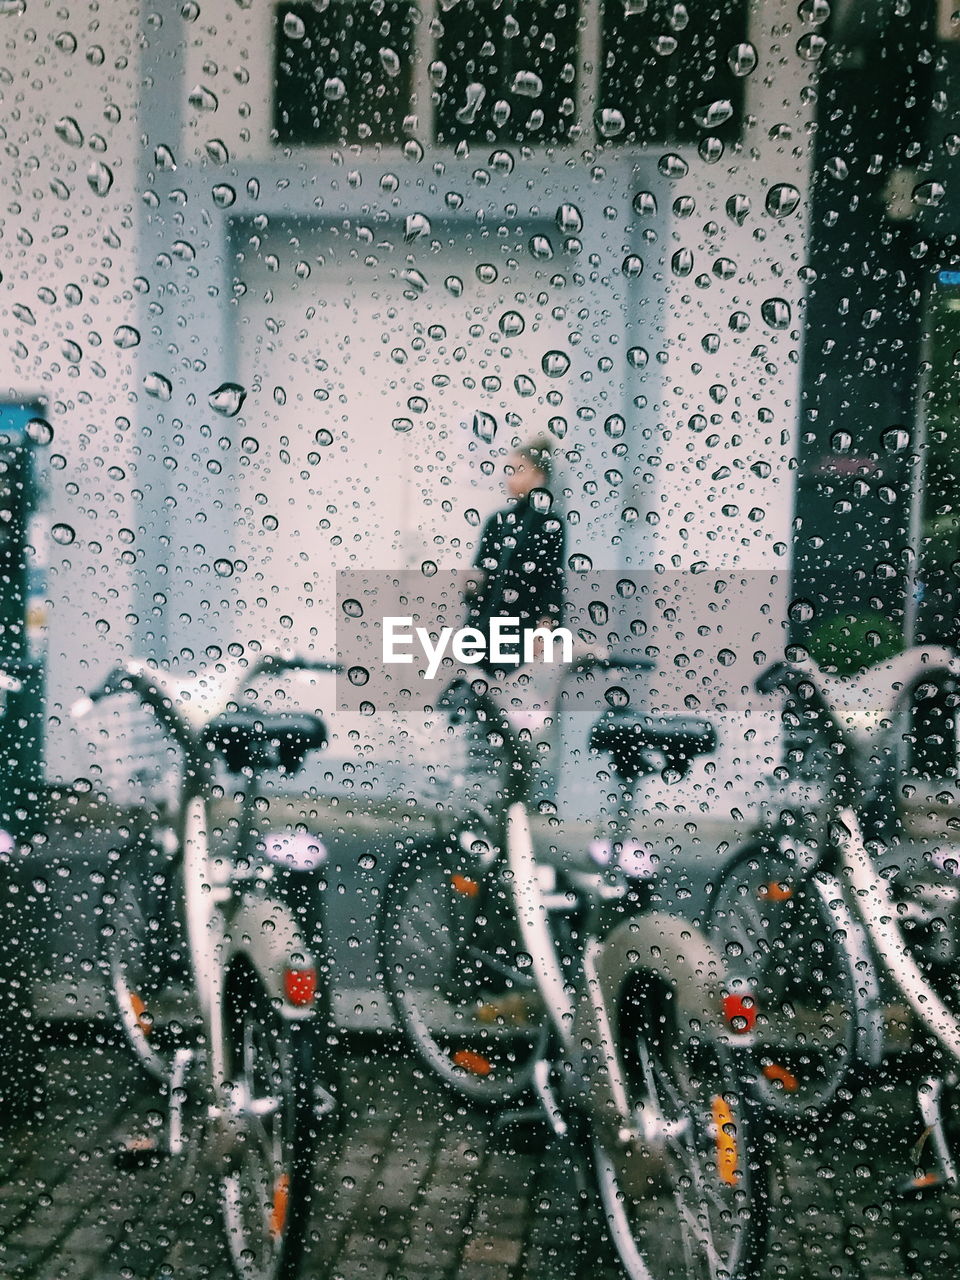 Water on glass with bicycle in background